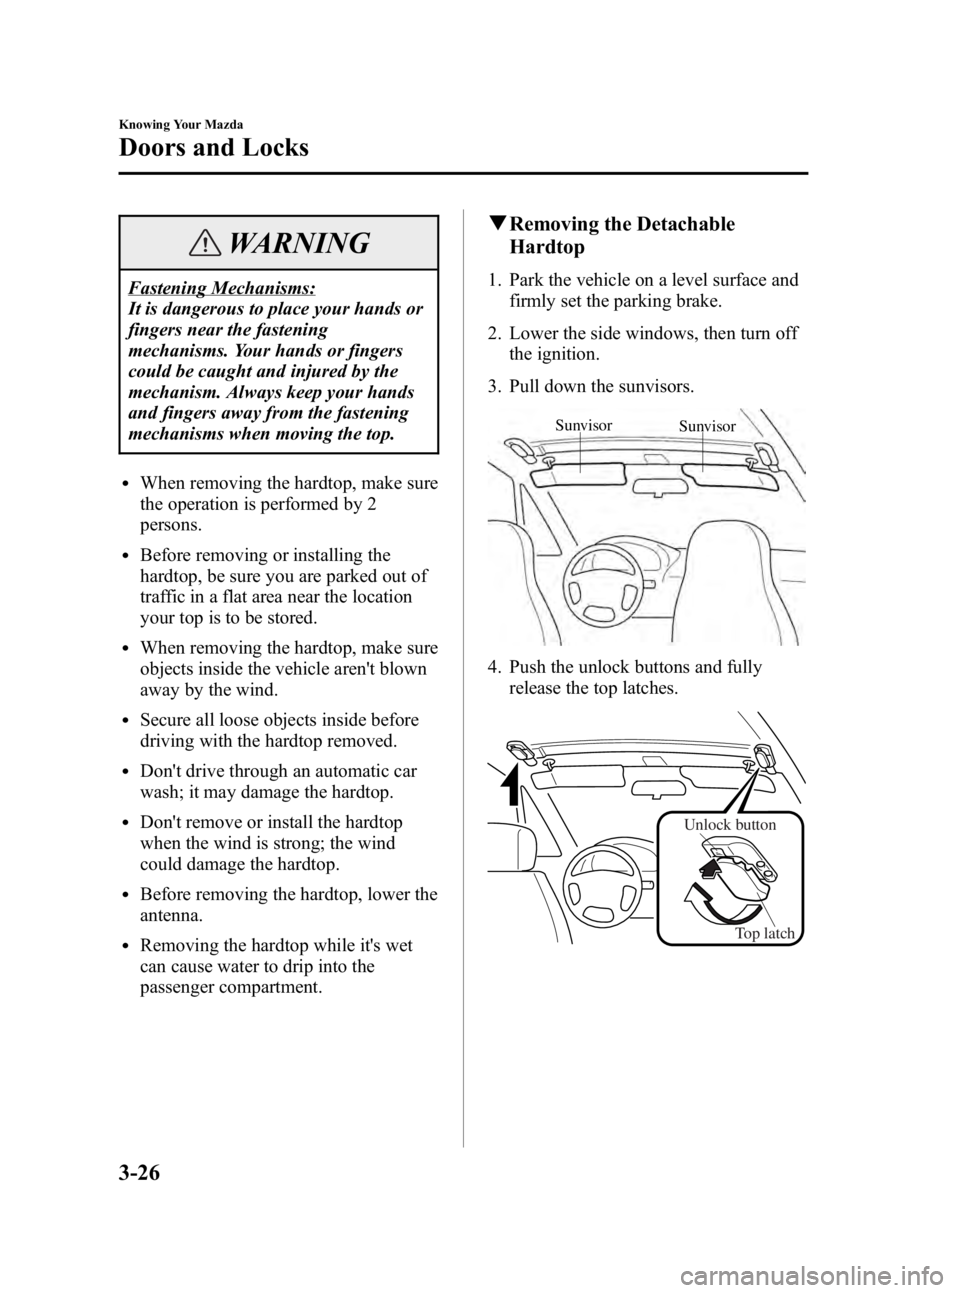 MAZDA MODEL MX-5 MIATA 2005 Repair Manual Black plate (68,1)
WARNING
Fastening Mechanisms:
It is dangerous to place your hands or
fingers near the fastening
mechanisms. Your hands or fingers
could be caught and injured by the
mechanism. Alway